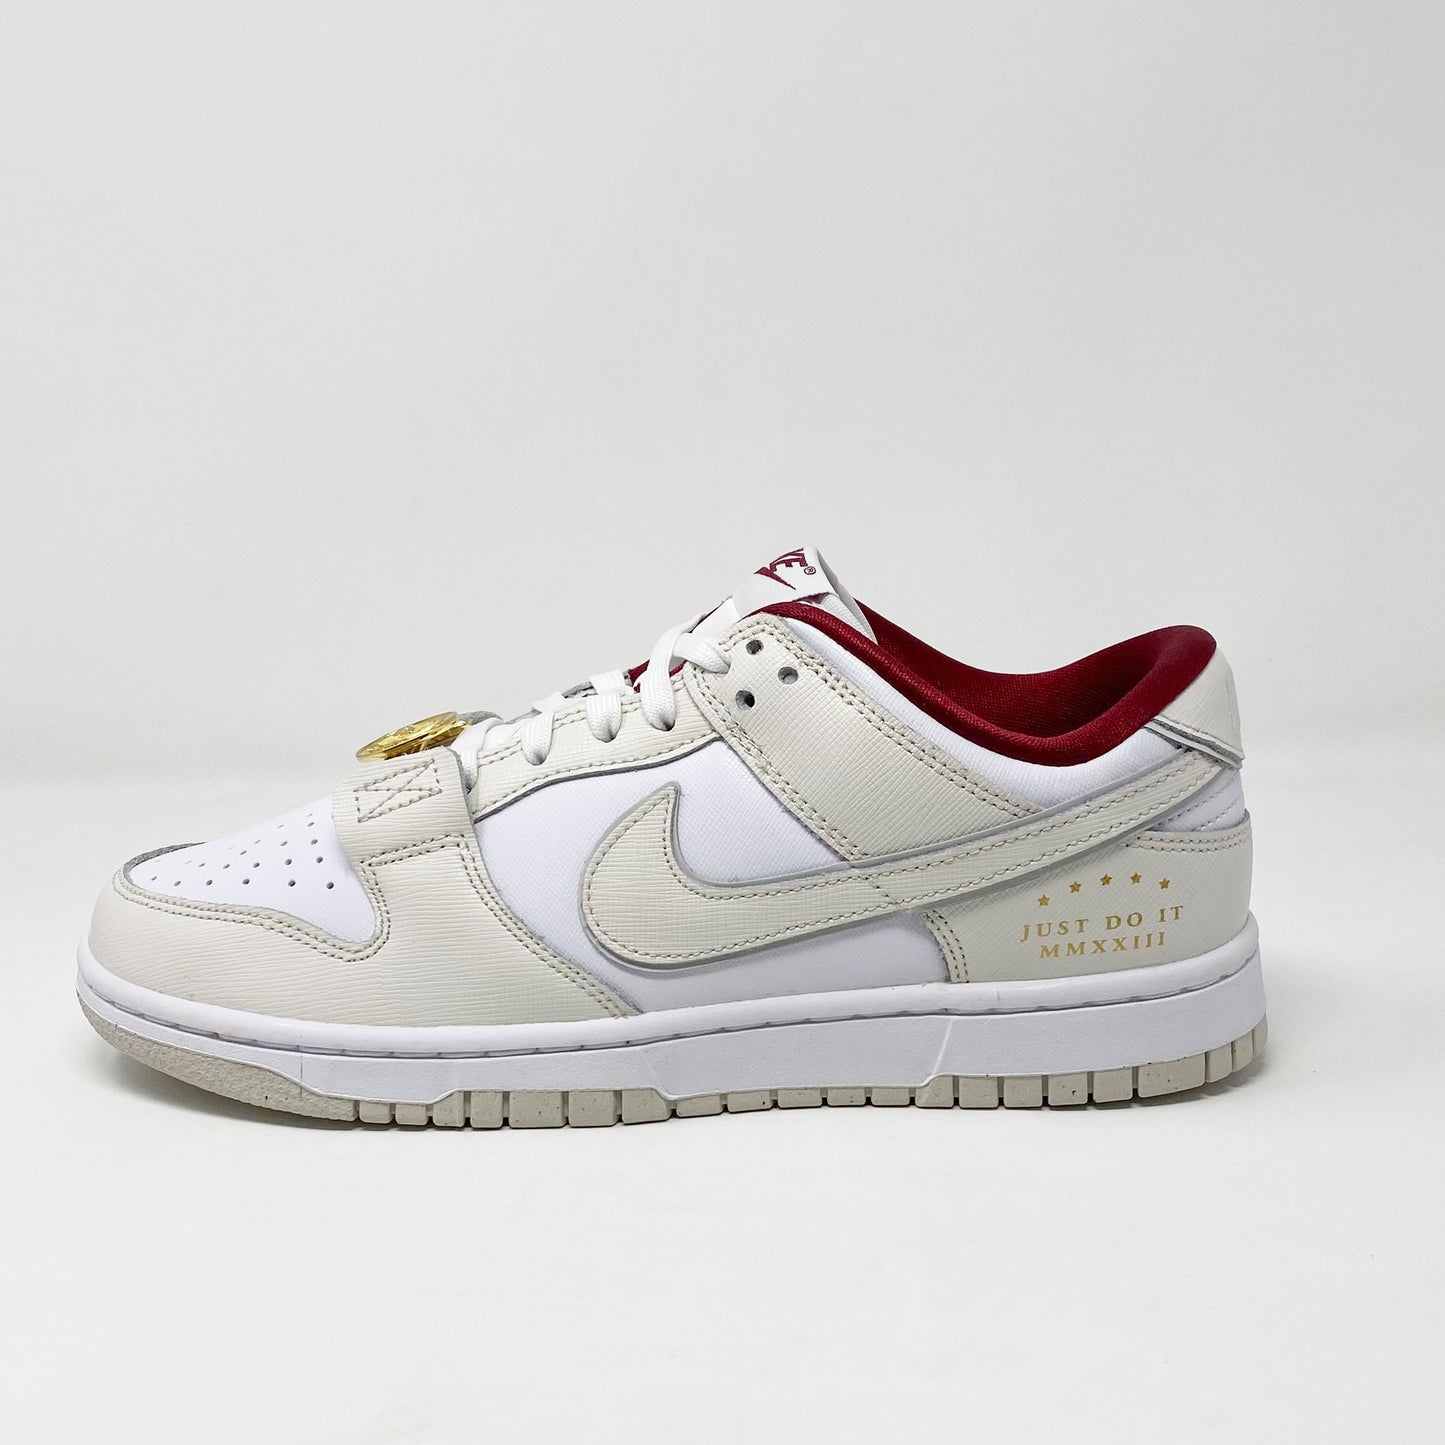 Nike Dunk Low “Just Do It White” (W)